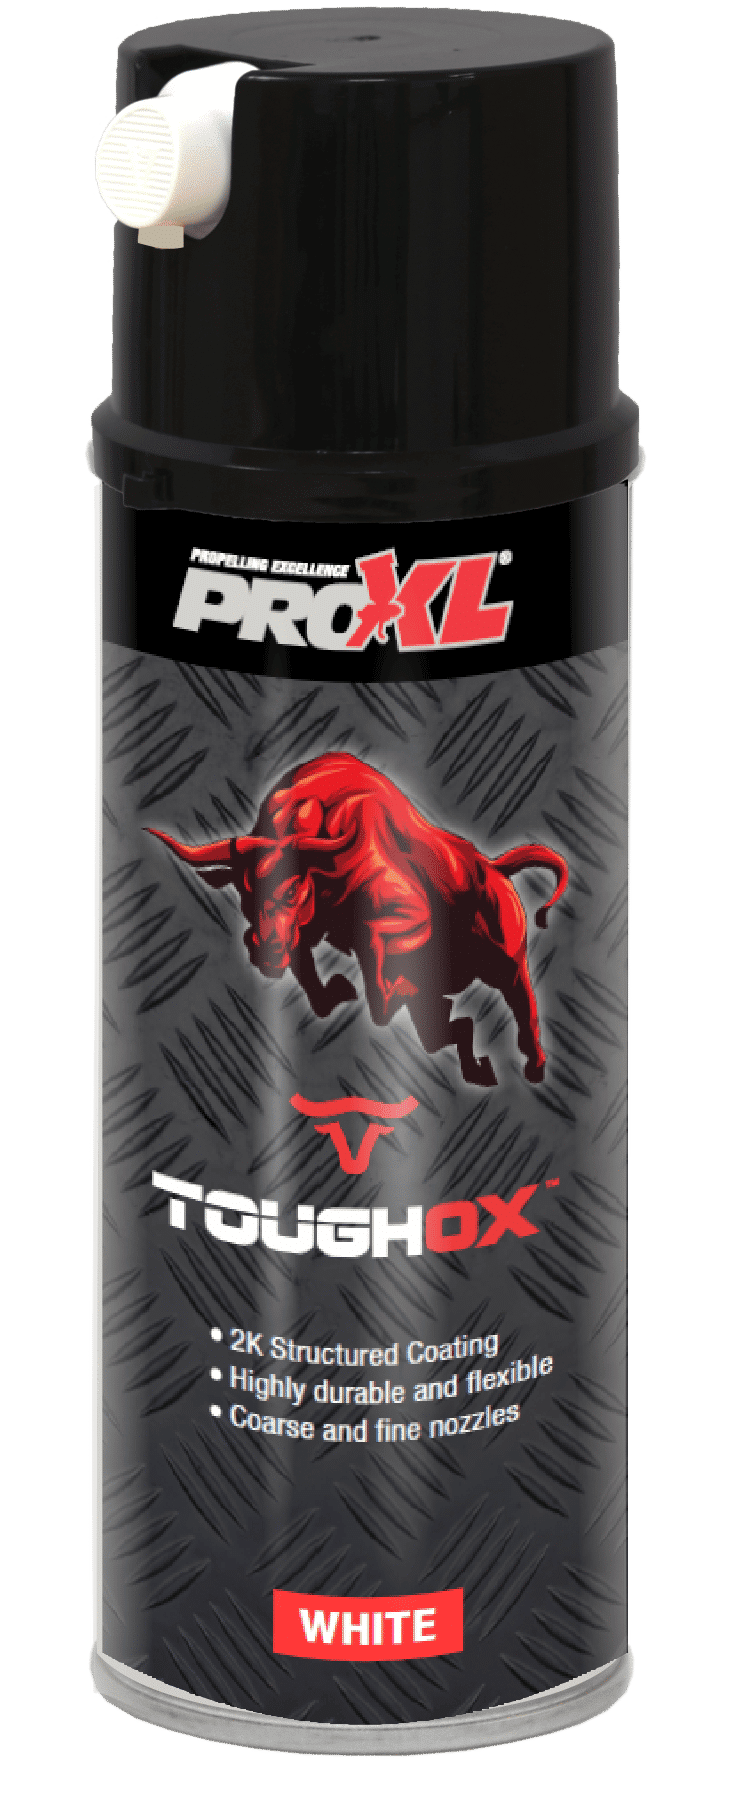 ToughOX Truck Bed Liner Aerosol- White (400ml) Product Image